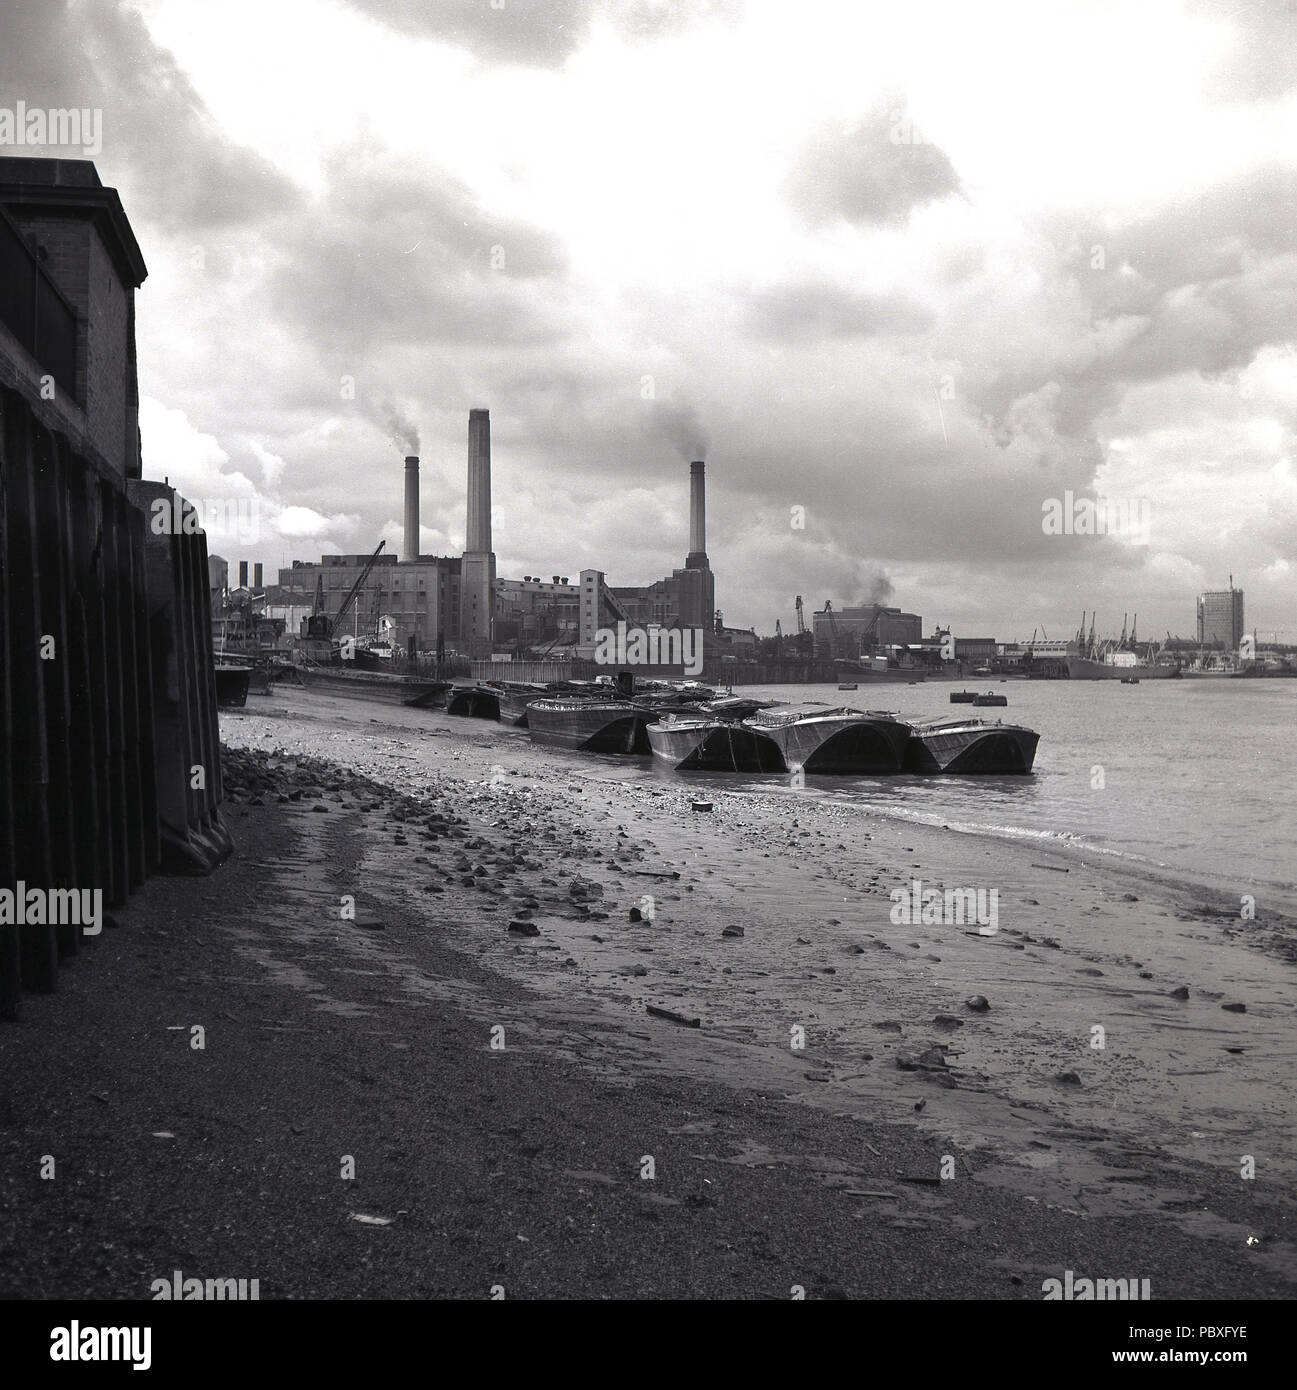 1950s, historical, the tide is out as barges sit on the south-bank of the river Thames by a small pebbly beach with a view  from the east of a working Deptford Power Station in the distance, London, England, UK. Designed by Sebastian de Ferranti, Deptford is know as the world's first central power station. Coal fired, it was unprecedented in both its scale and high voltage and it continued operating until the late 1960s. Stock Photo